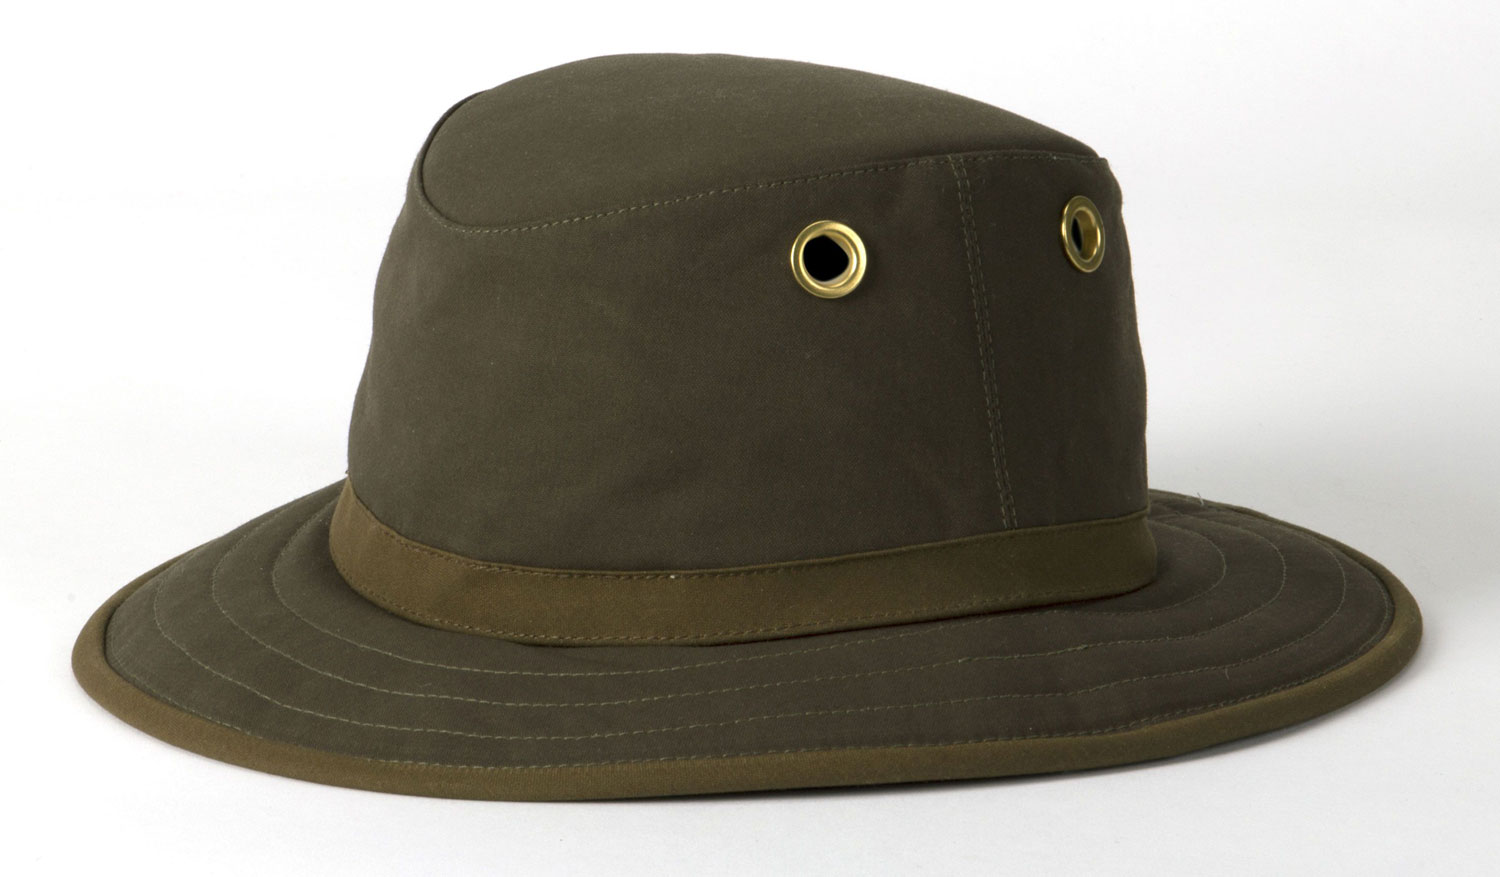 Tilley Unisex TWC7 Outback Waxed Cotton Brim Hat Olive UPF 50 